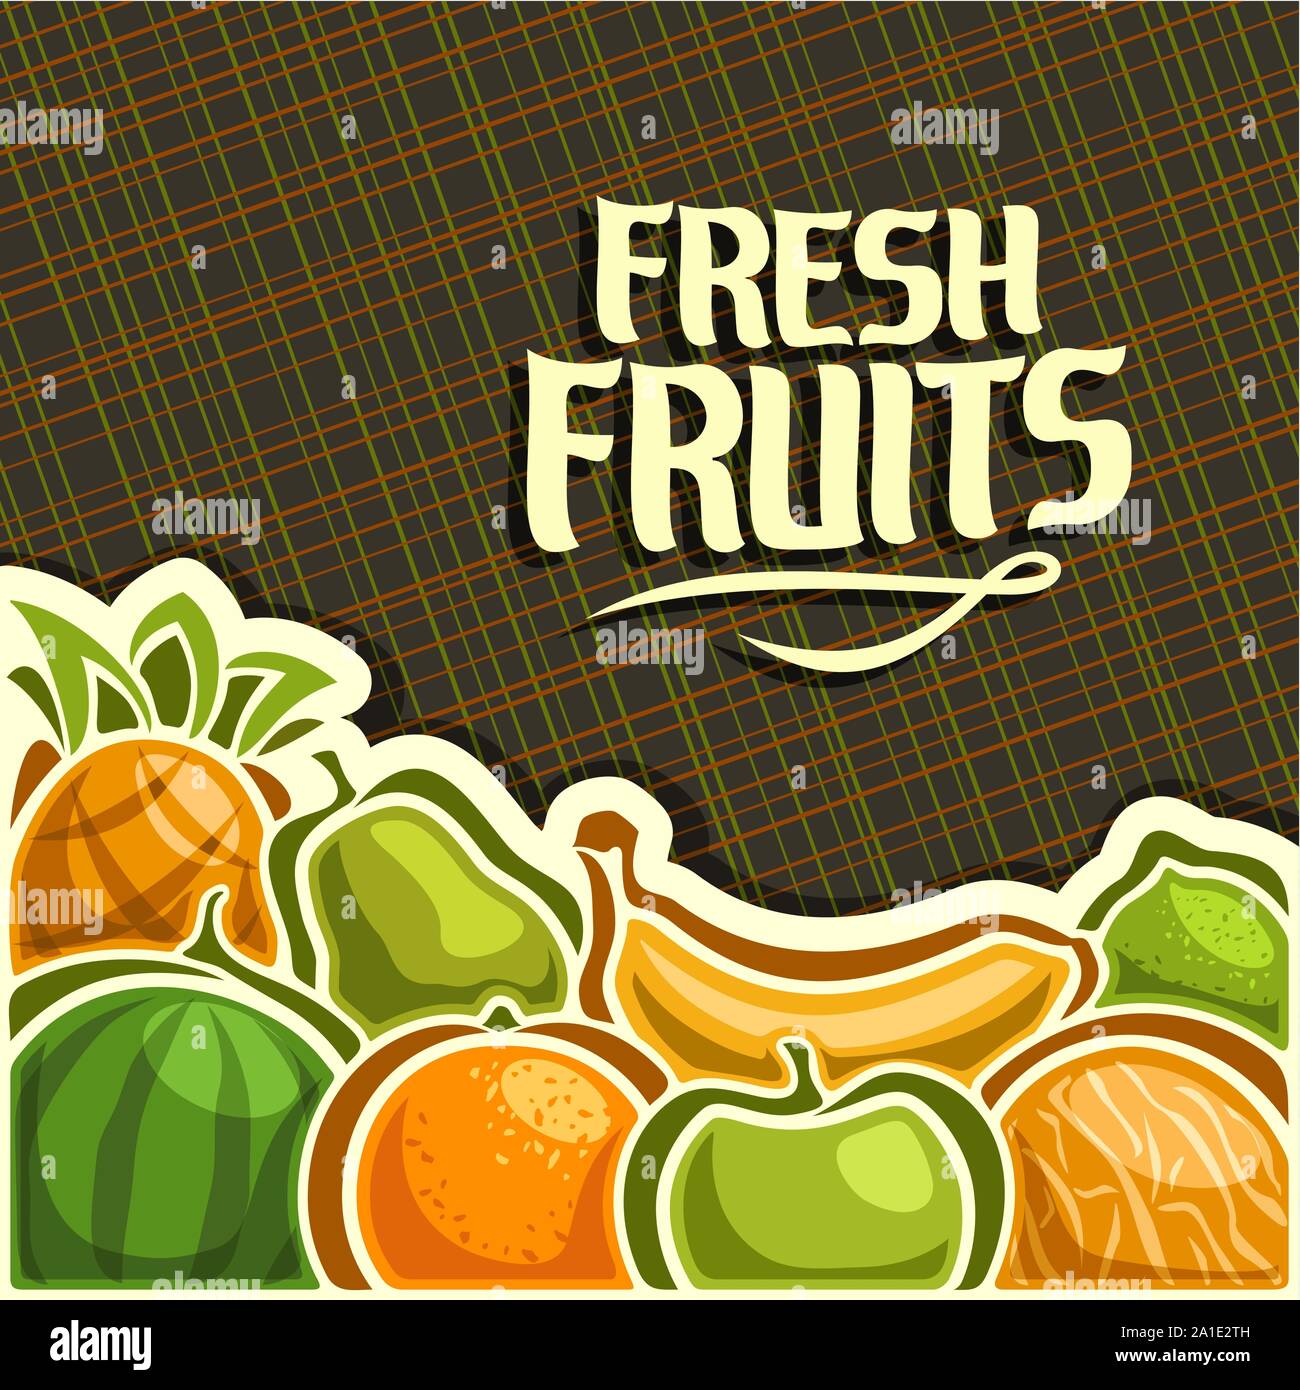 https://c8.alamy.com/comp/2A1E2TH/vector-poster-for-fresh-fruits-with-copy-space-cover-with-summer-fruit-mix-on-texture-pattern-layout-with-original-font-for-text-fresh-fruits-with-a-2A1E2TH.jpg